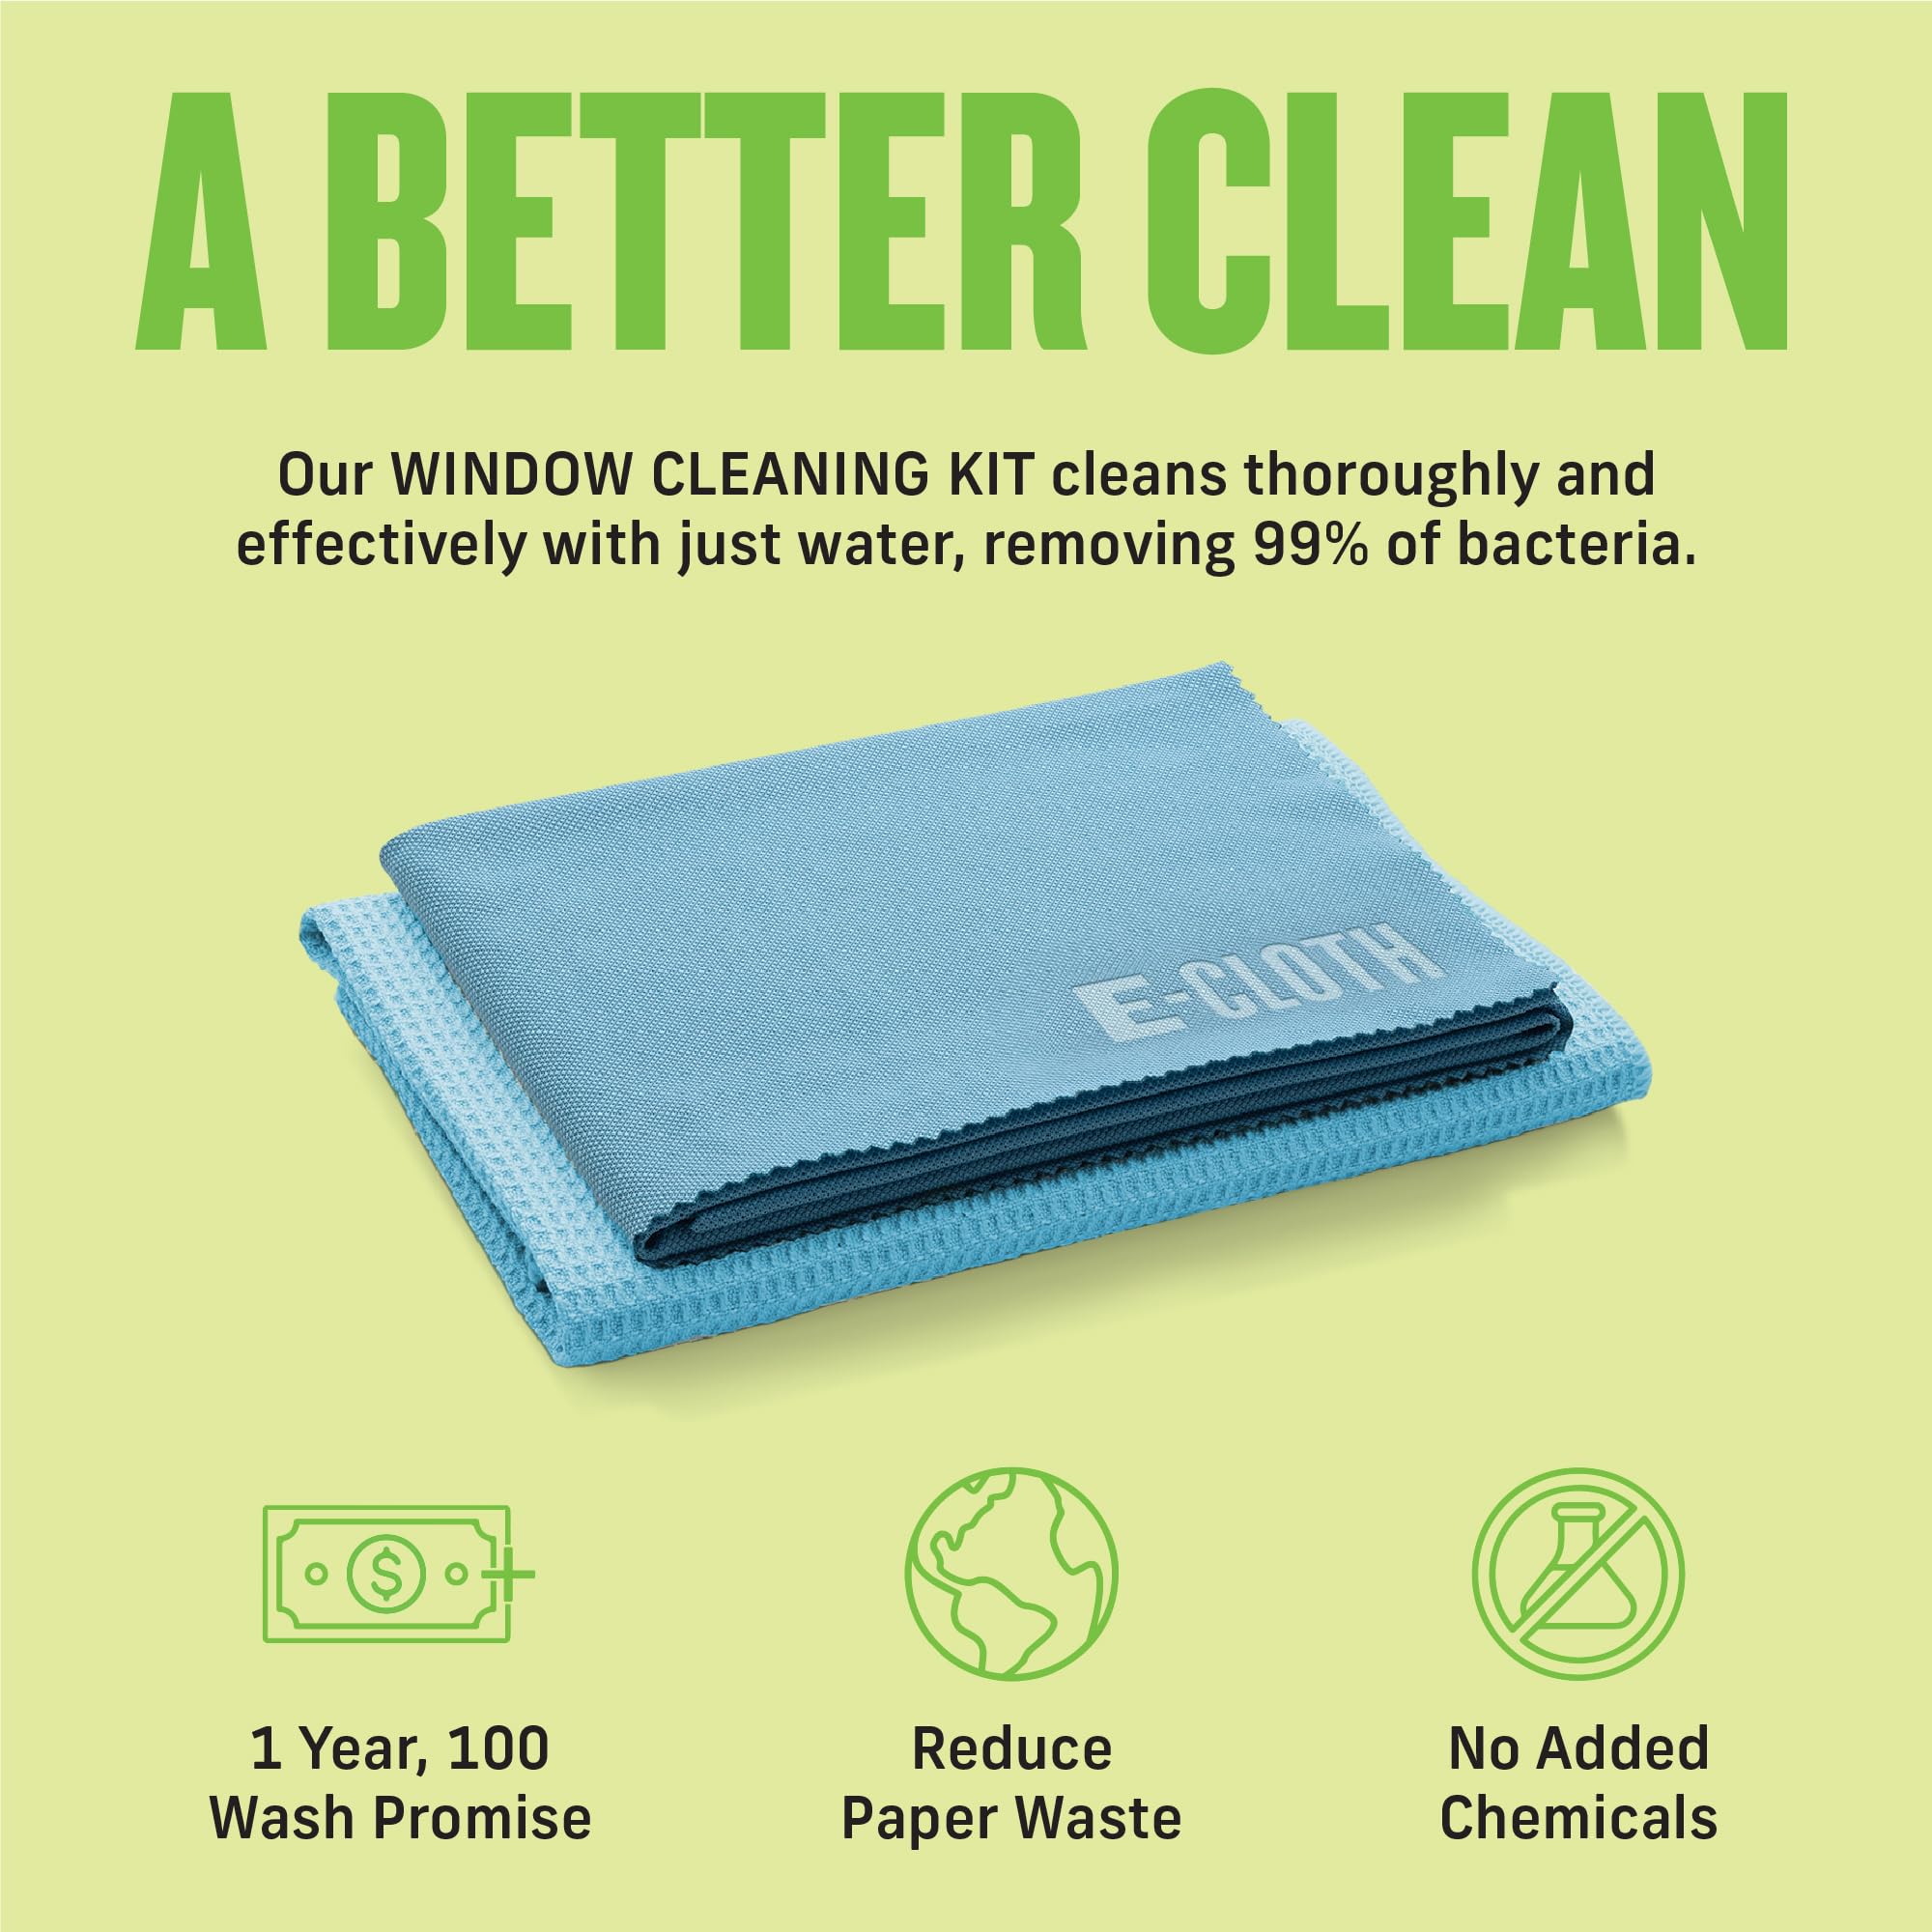 E-Cloth Microfiber Cleaning Cloth Glass Kit - Microfiber Towel Window Cleaning Kit - Microfiber Towels for Cars, Windows, Mirrors, & More - Alaskan Blue